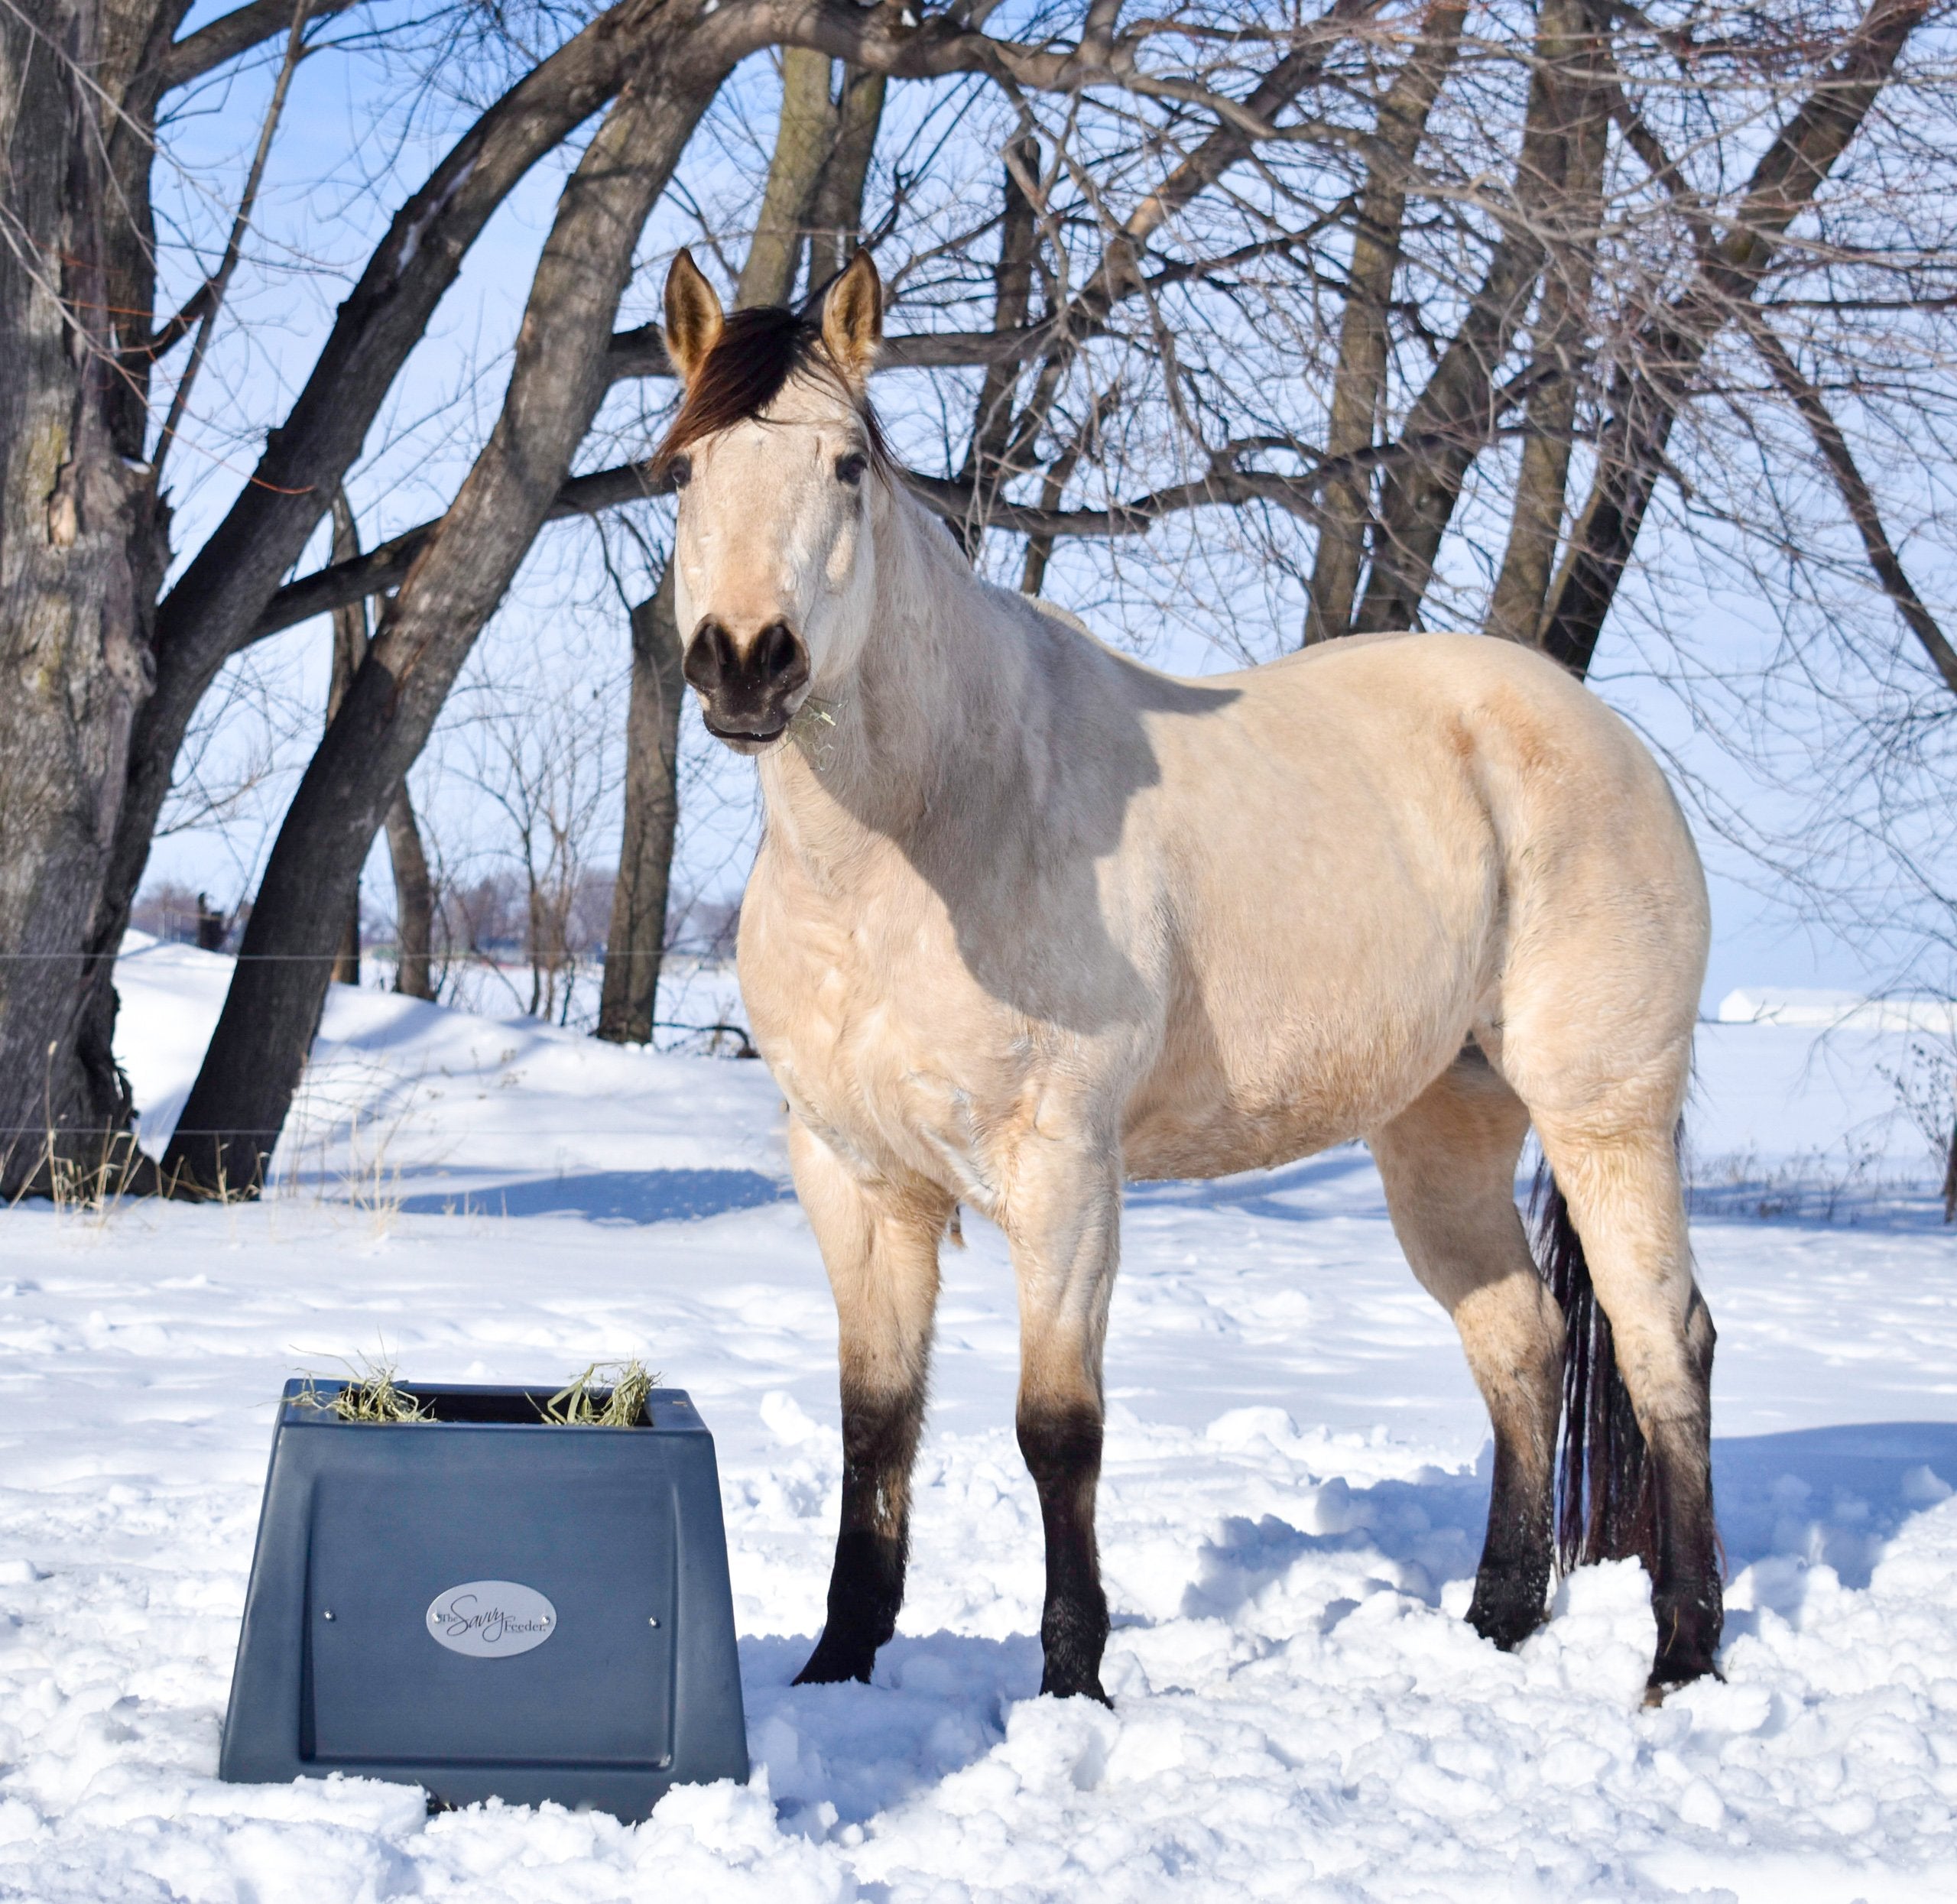 A buckskin horse stands in the snow while eating from the Savvy Feeder, his slow hay feeder.